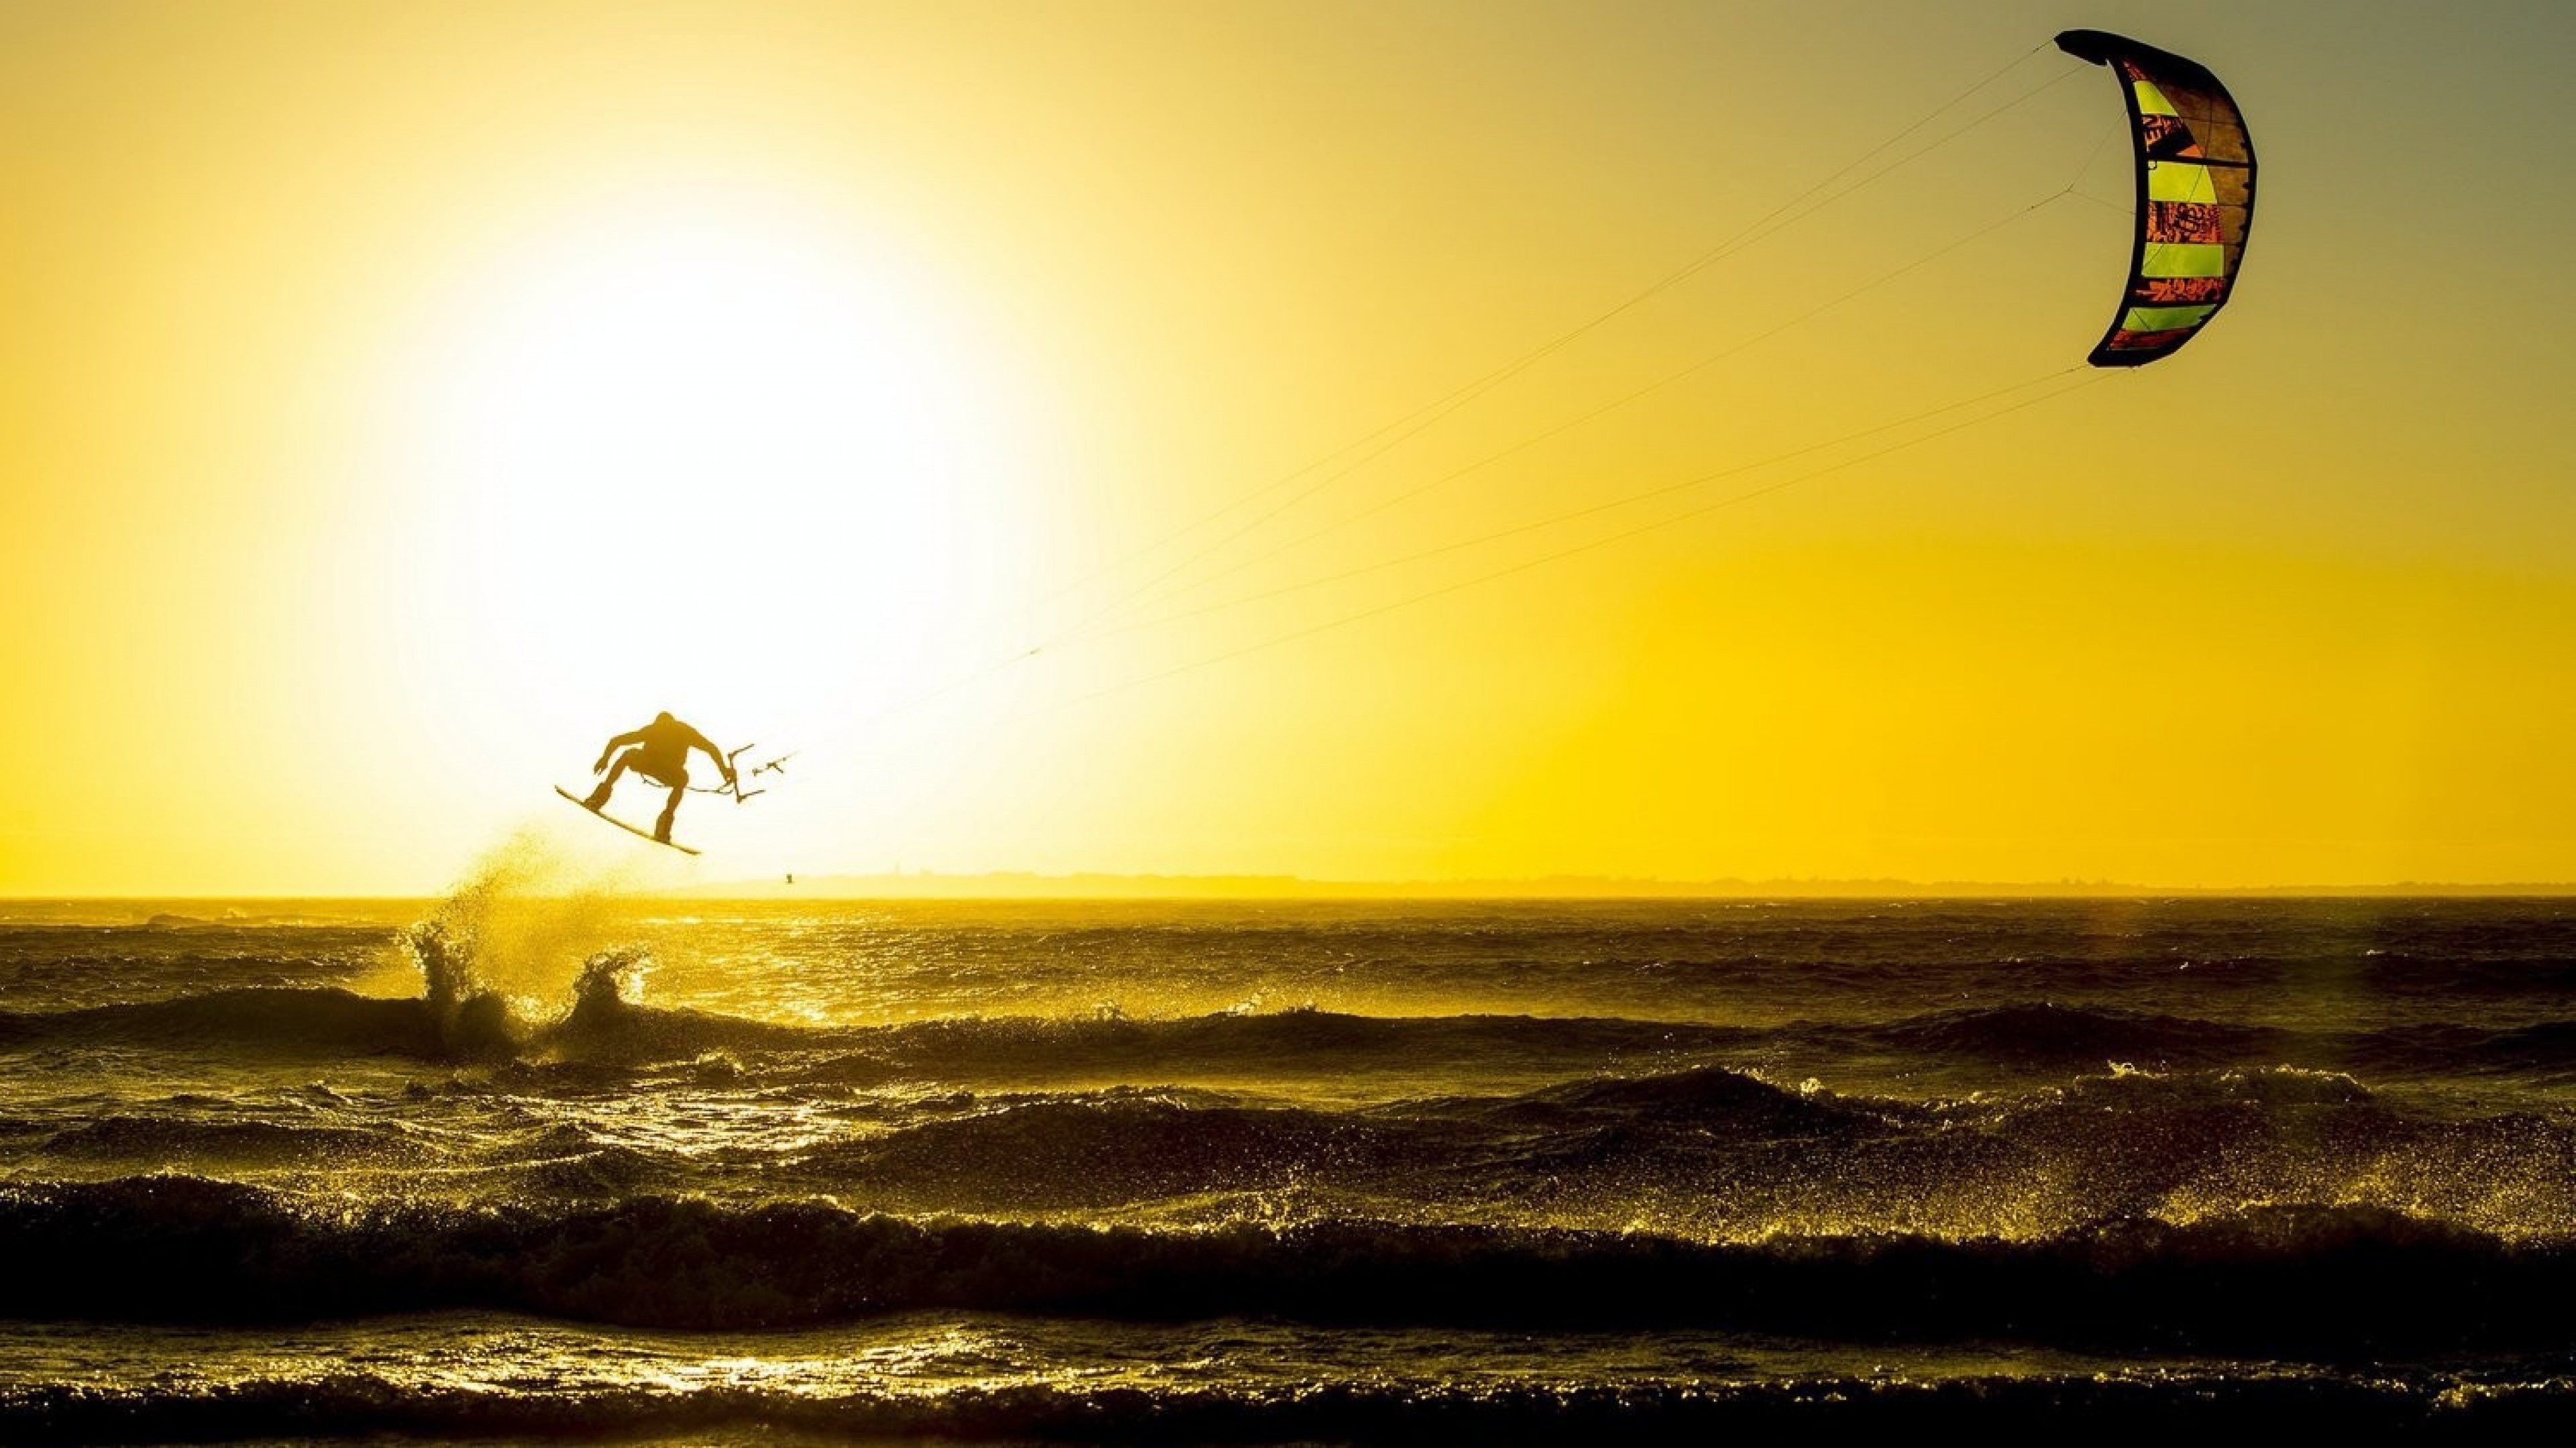 Kiteboarding: Pulling a rider across the sea, Sunset, A wake-style board. 3840x2160 HD Background.